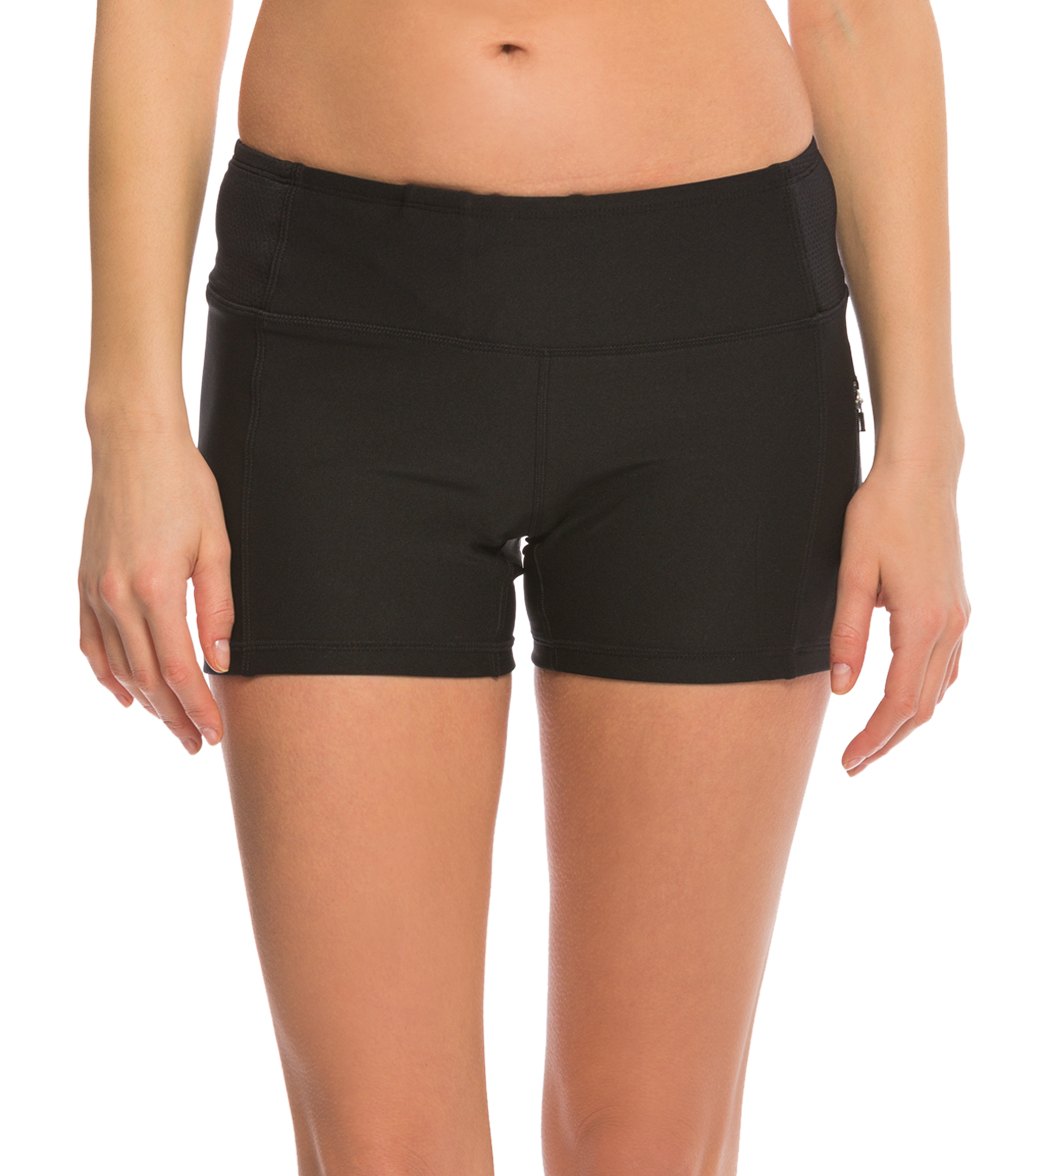 Beach House Solid Chandra Swim Short at SwimOutlet.com - Free Shipping